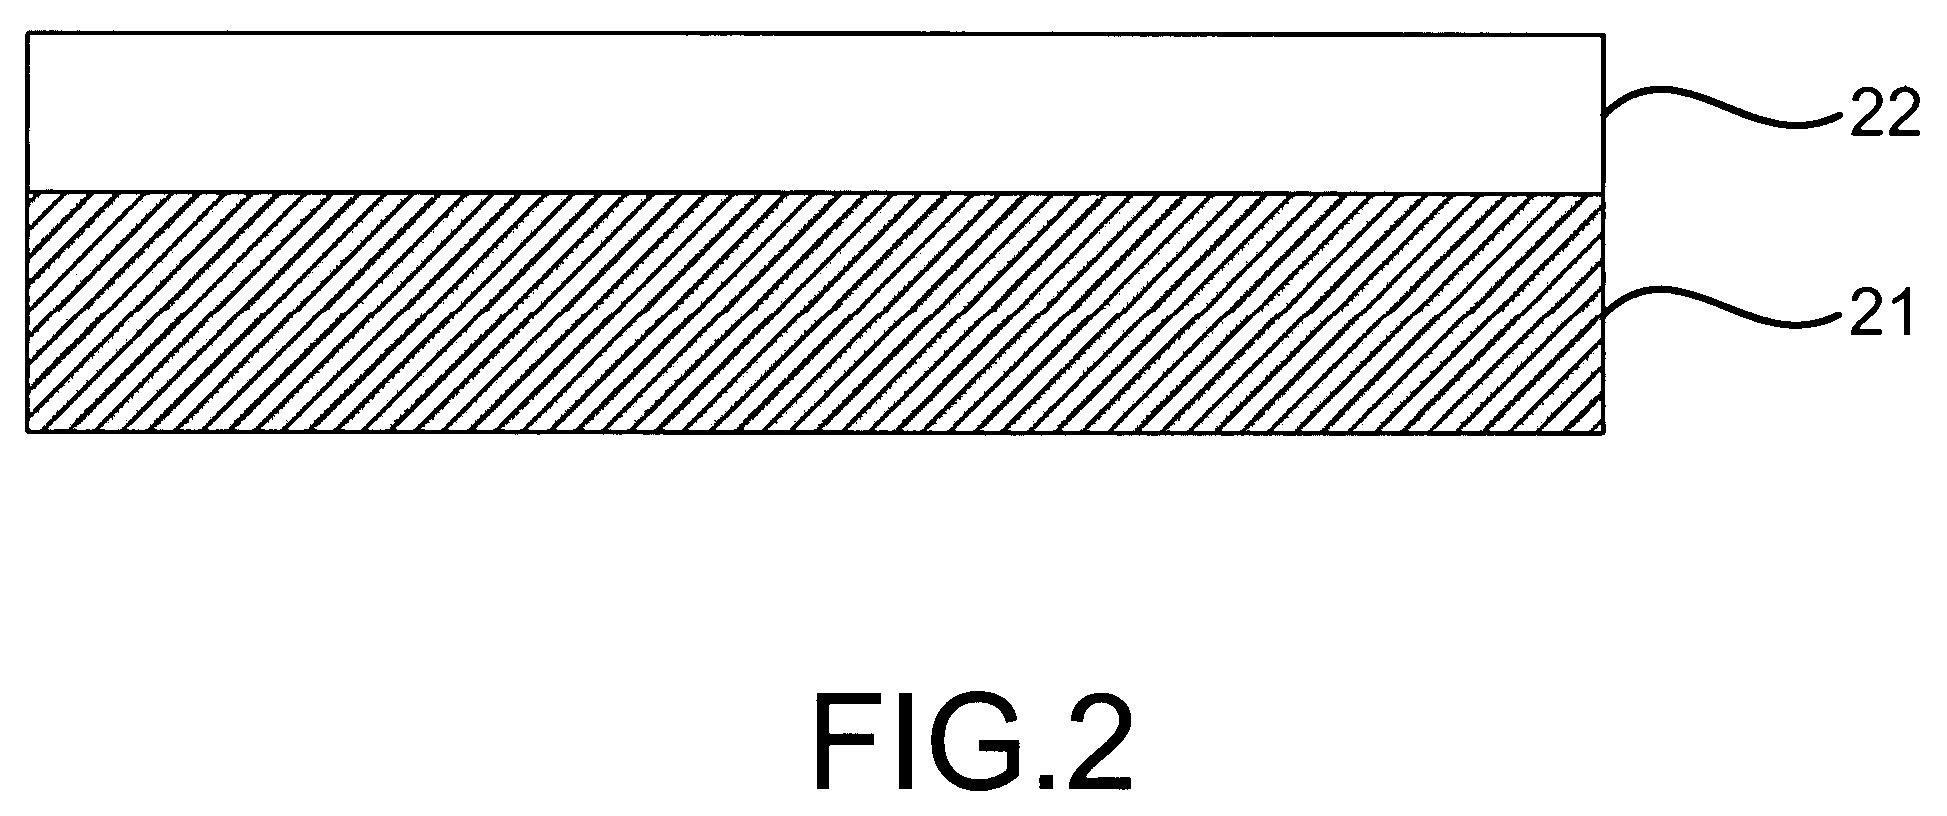 Structure of LiAlO2 substrate having ZnO buffer layer